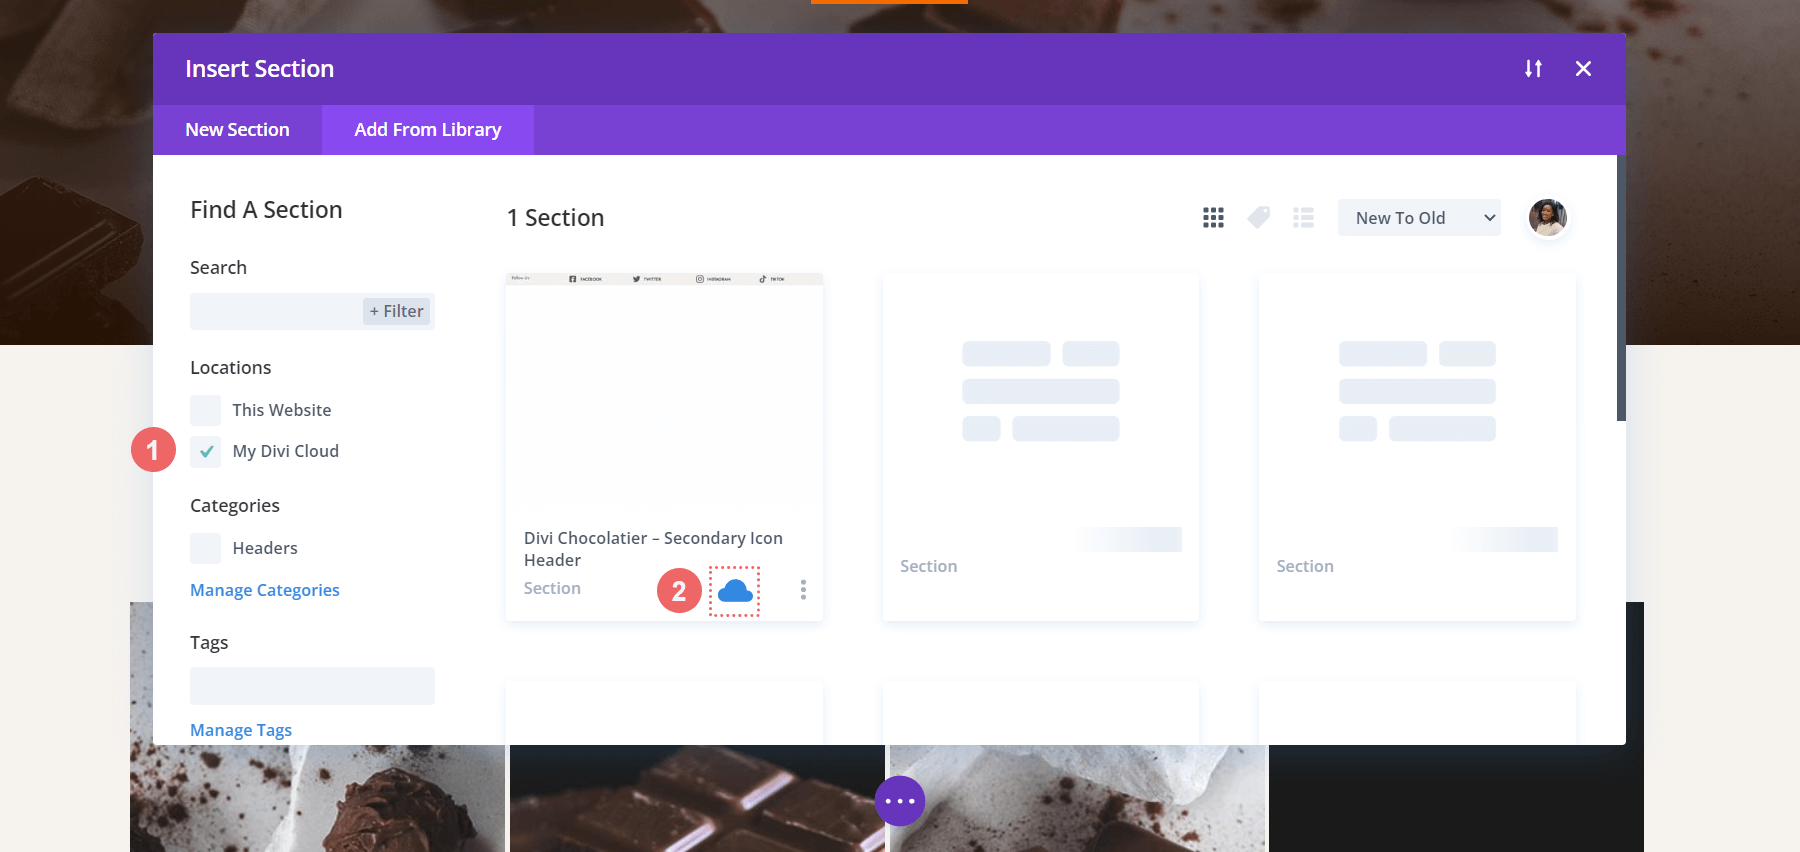 A snippet of the Divi Cloud Library